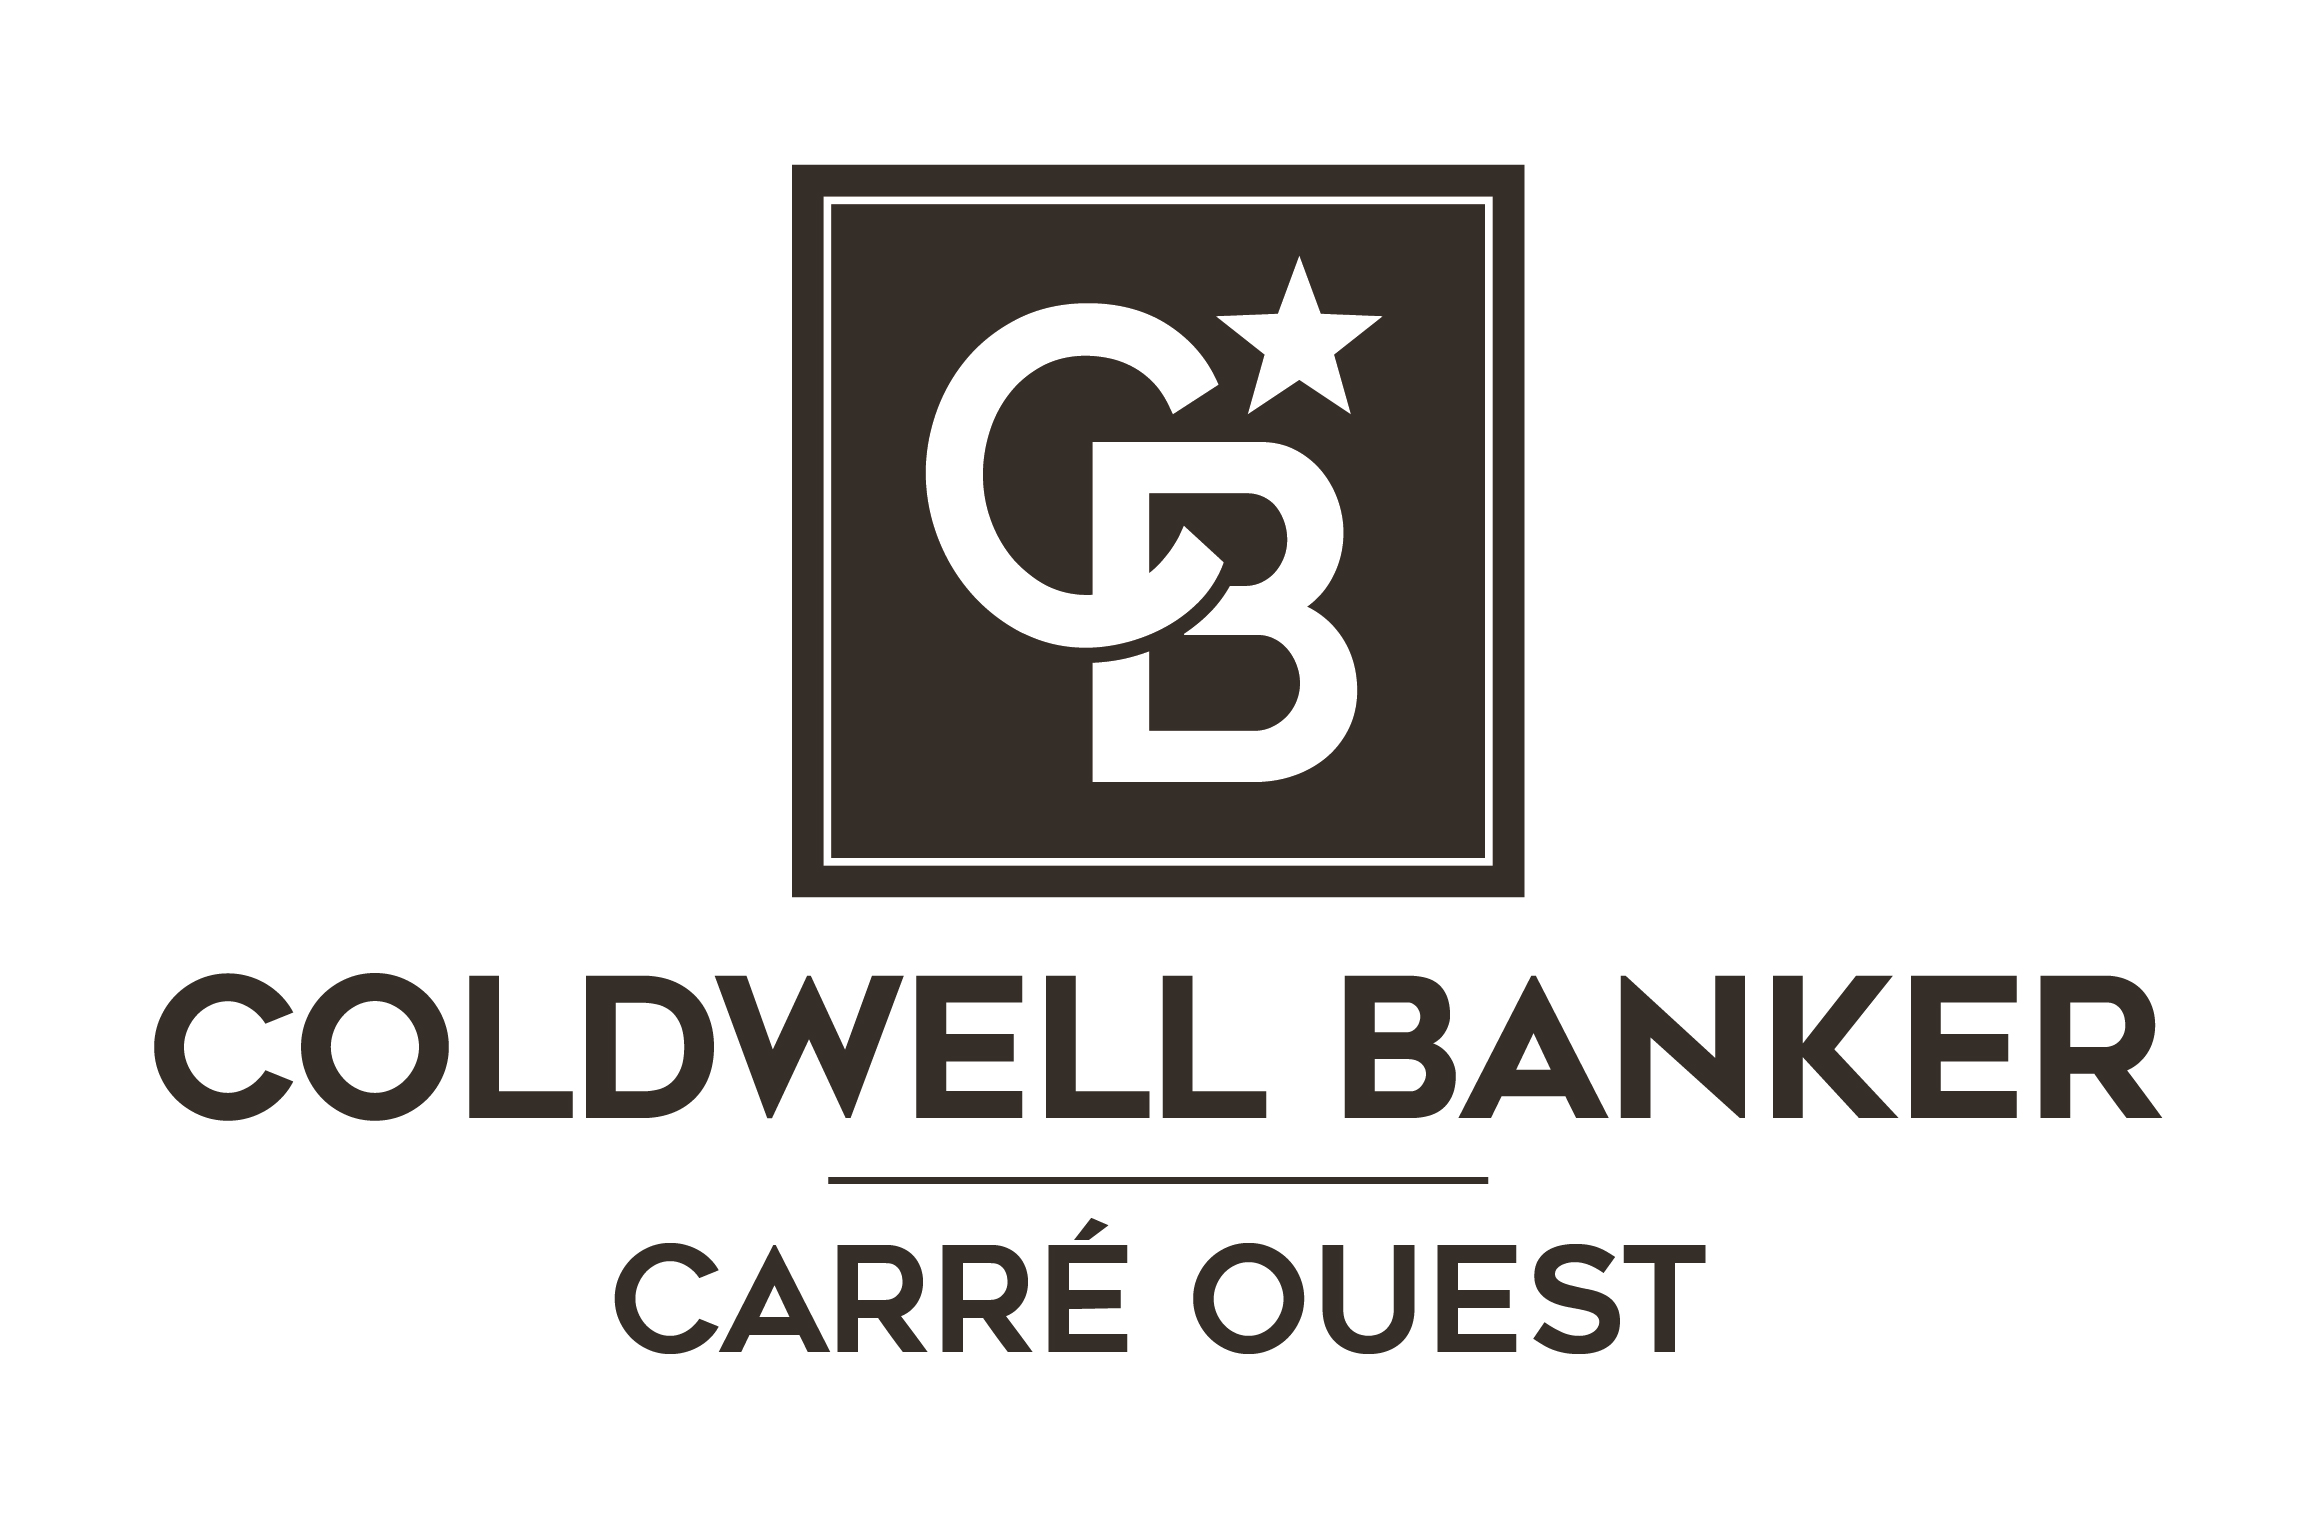 Coldwell Banker Carre Ouest